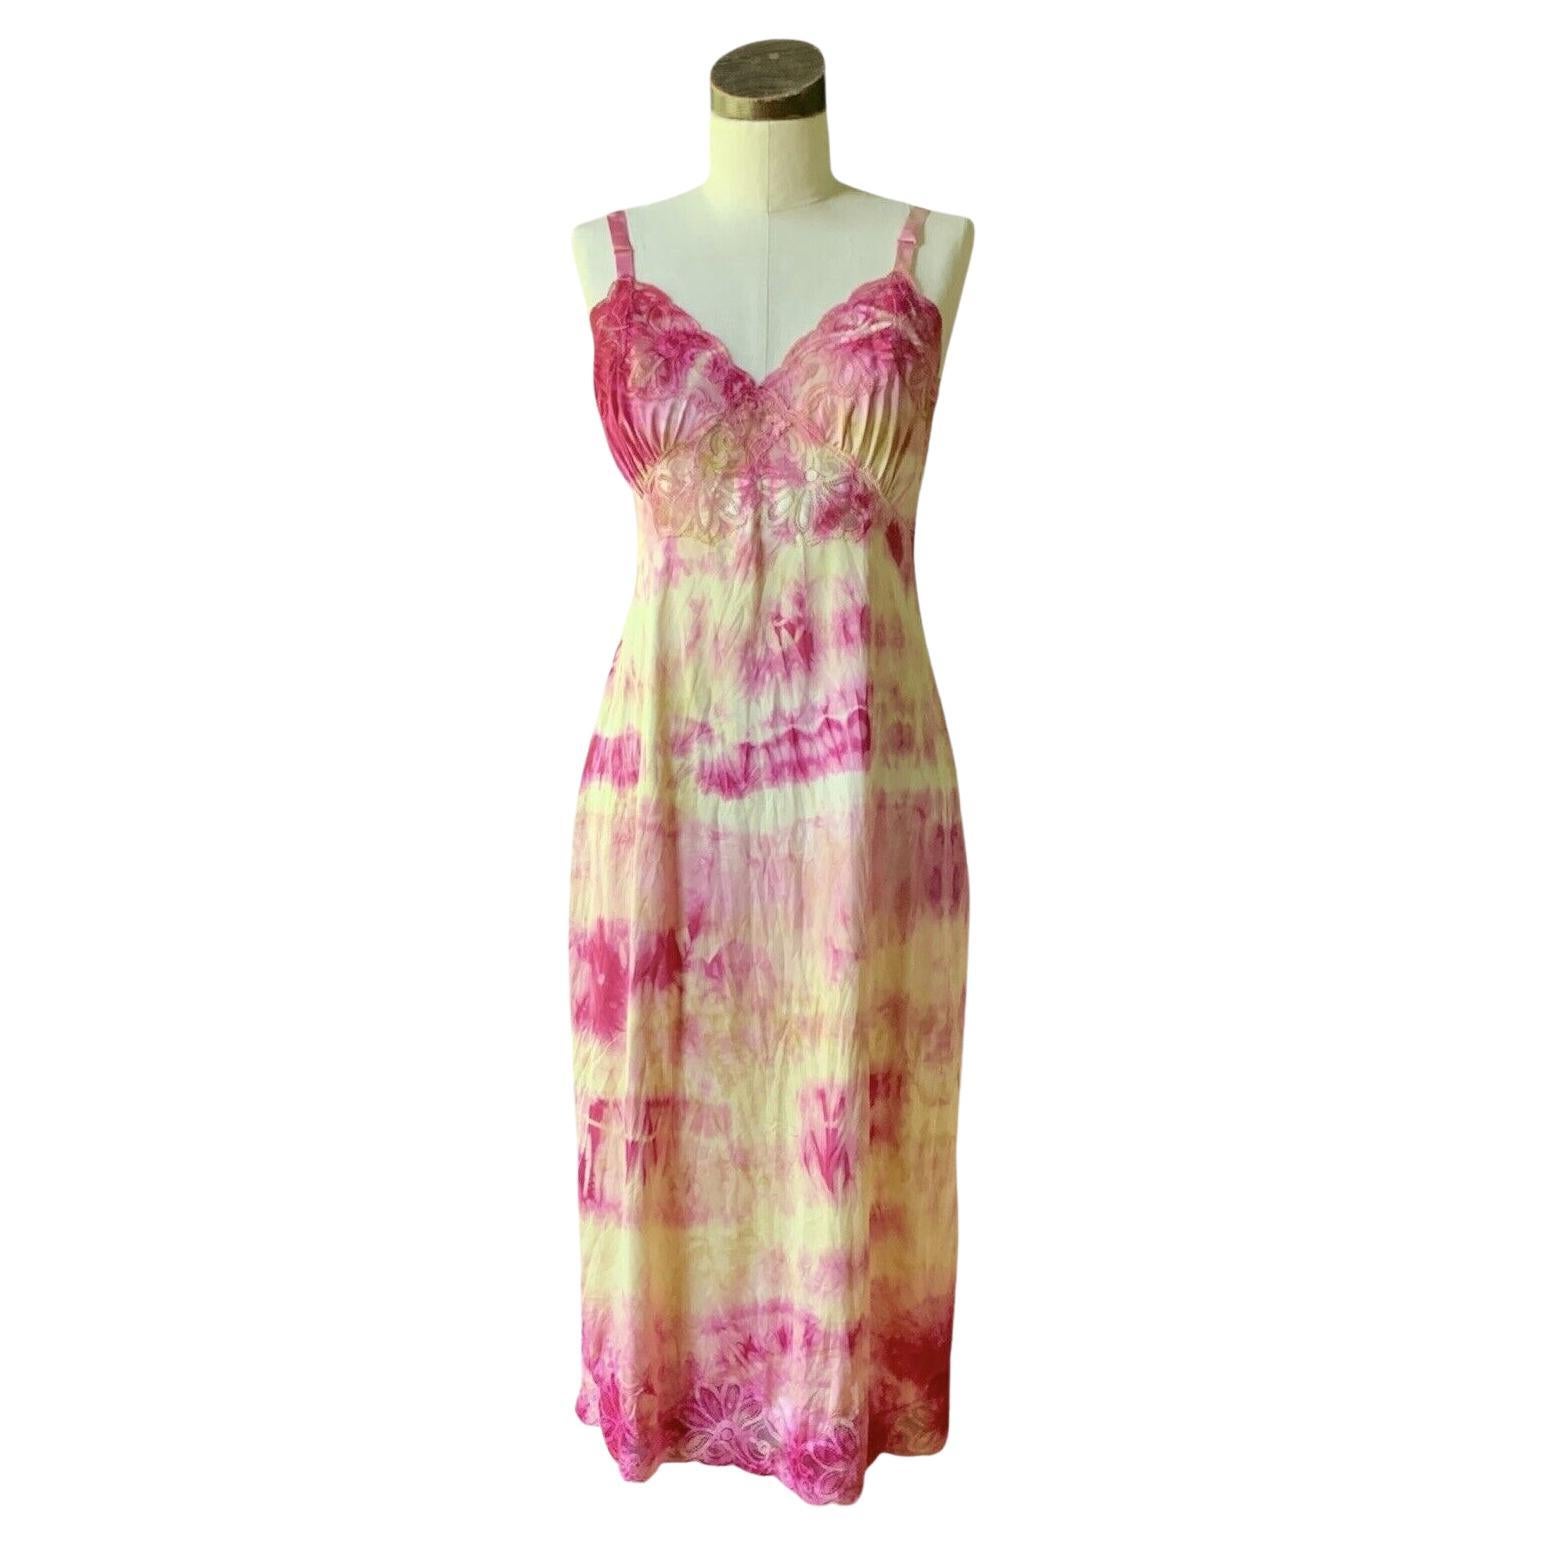 DYED PETALS Vintage Hand Botanically Dyed Tie-Dyed Slip Dress S/M 34 For Sale